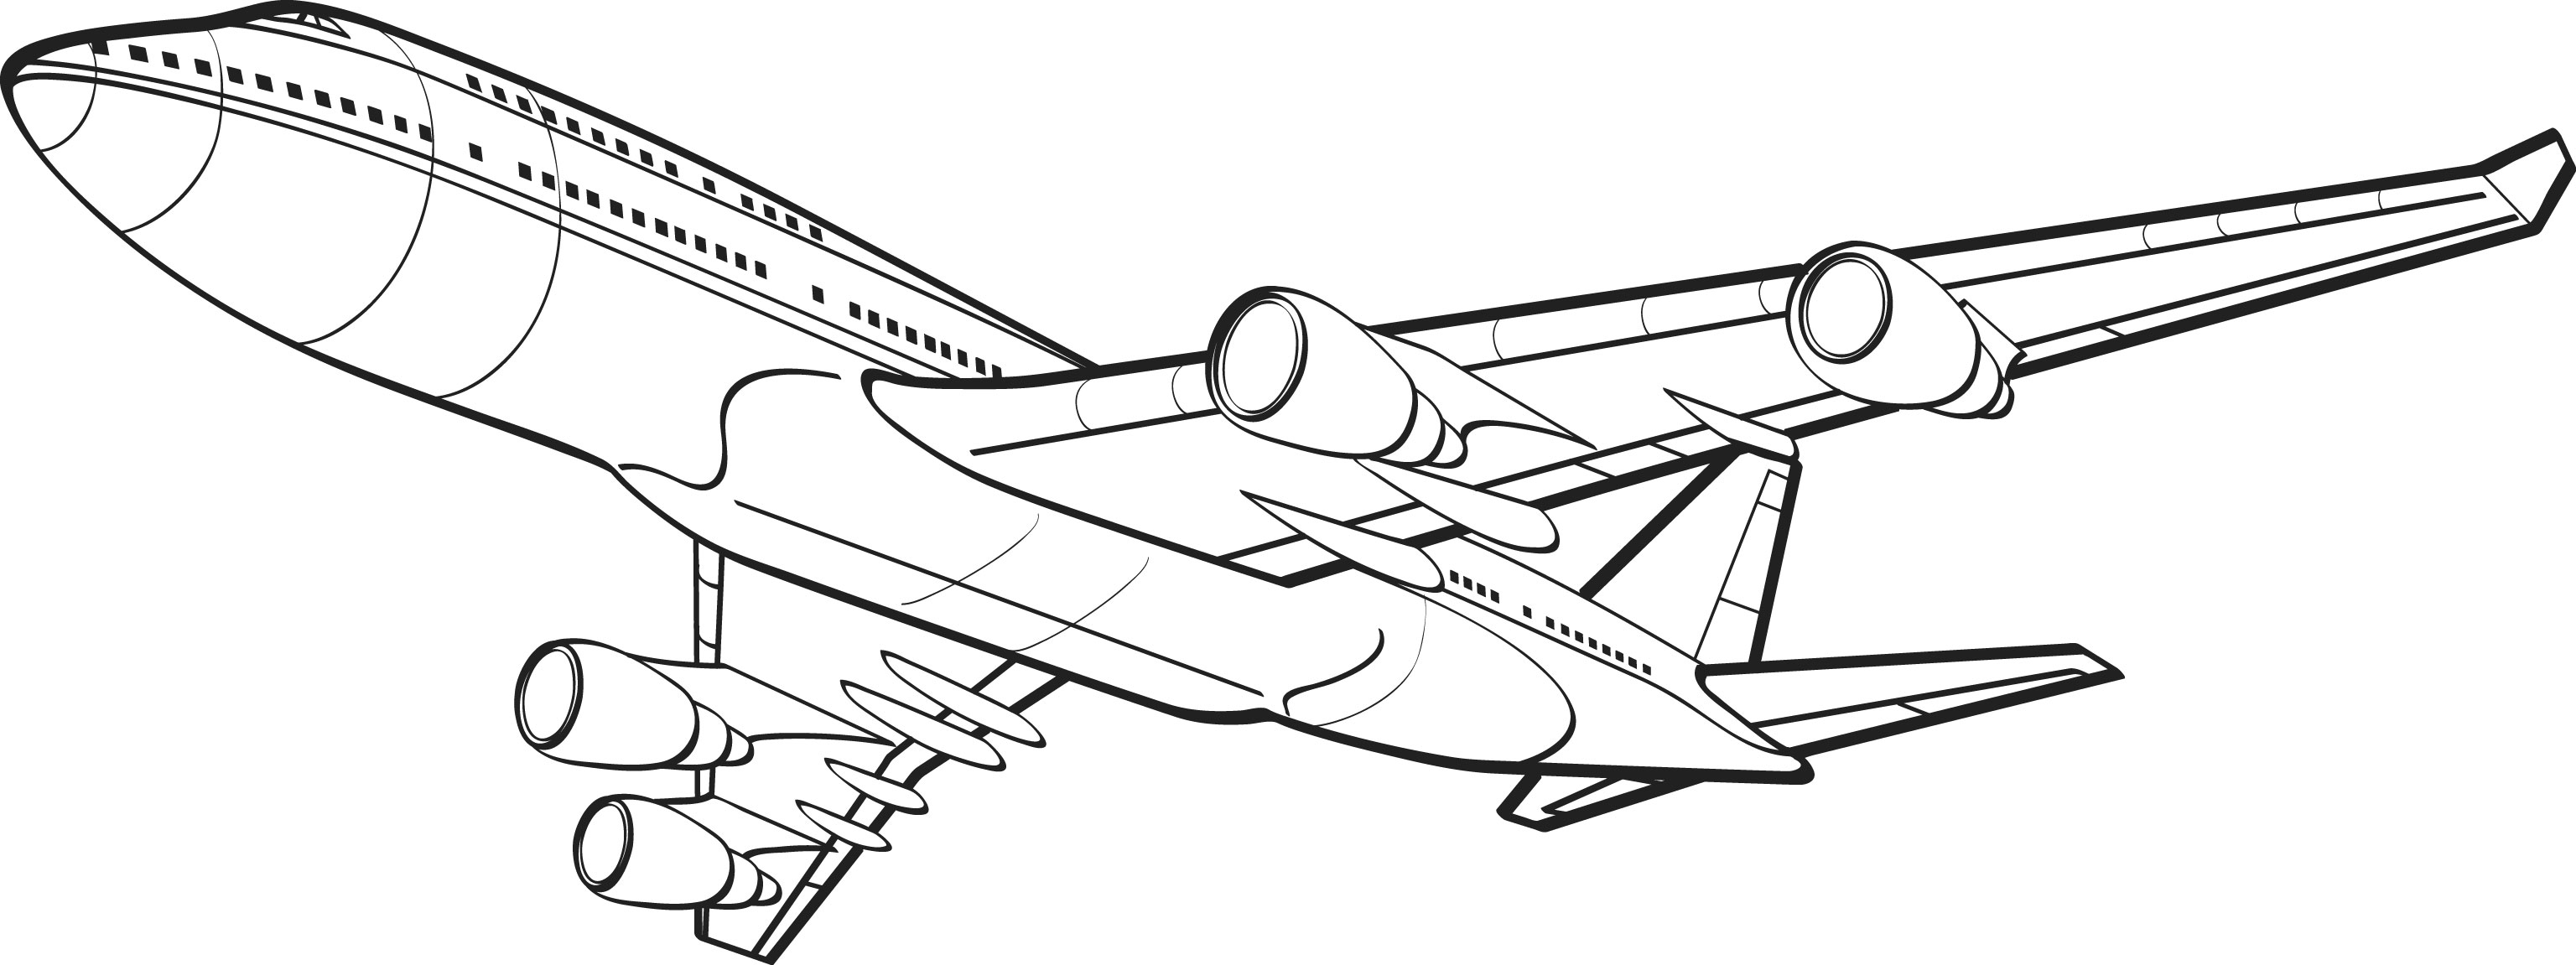 Boing 747 Dremlifter Coloring Pages - Learny Kids